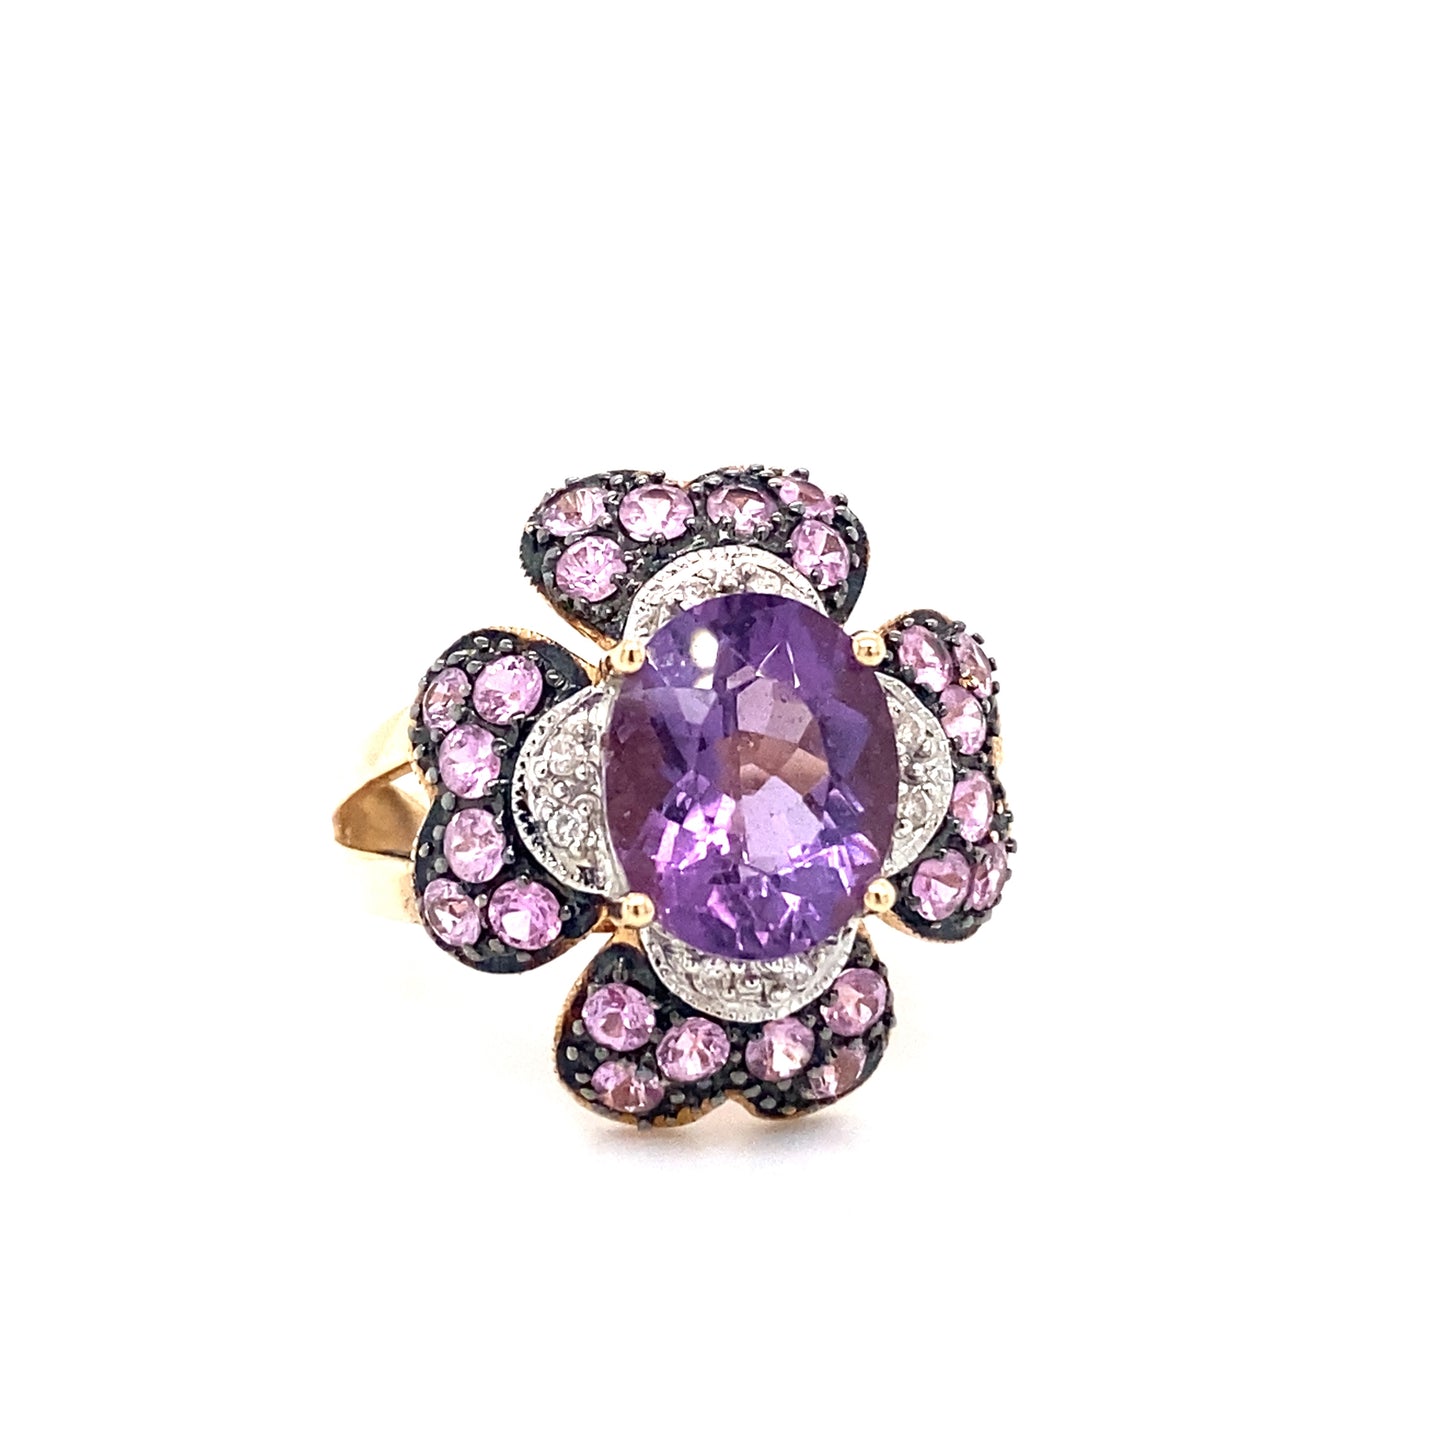 Circa 1990s Amethyst and Diamond Flower Cocktail Ring in 14K Gold